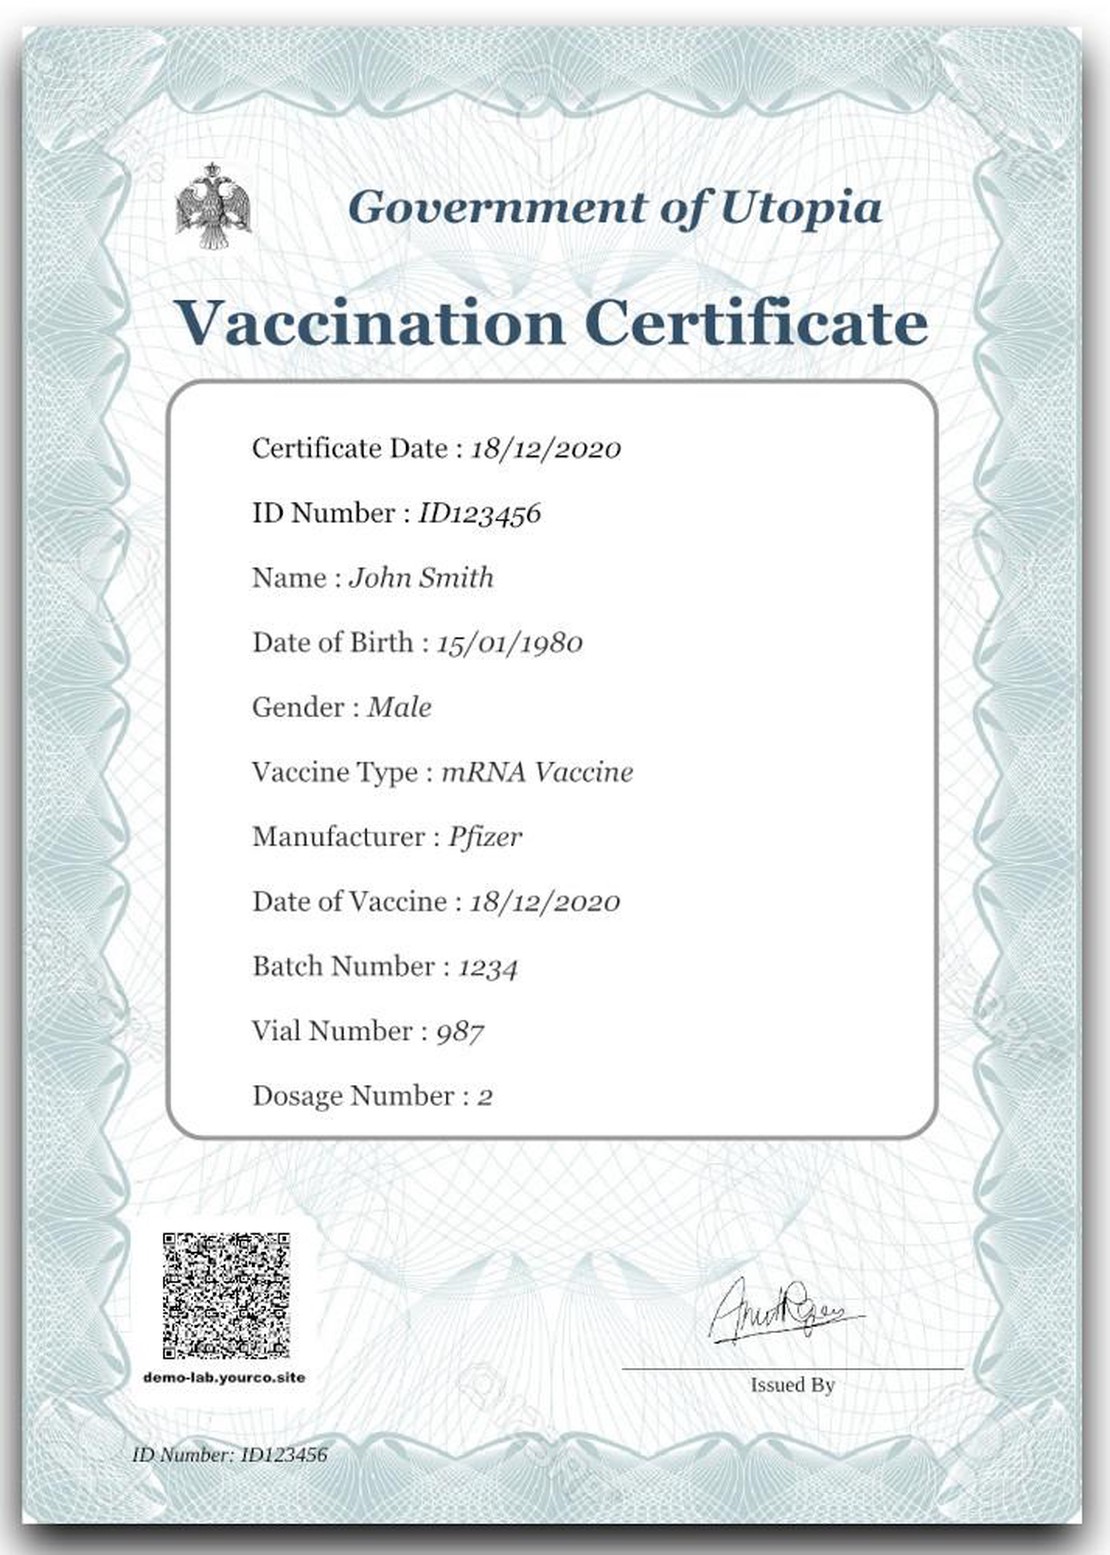 Fake Covid Certificates and Health Passes Easily Available on Social Media Platforms